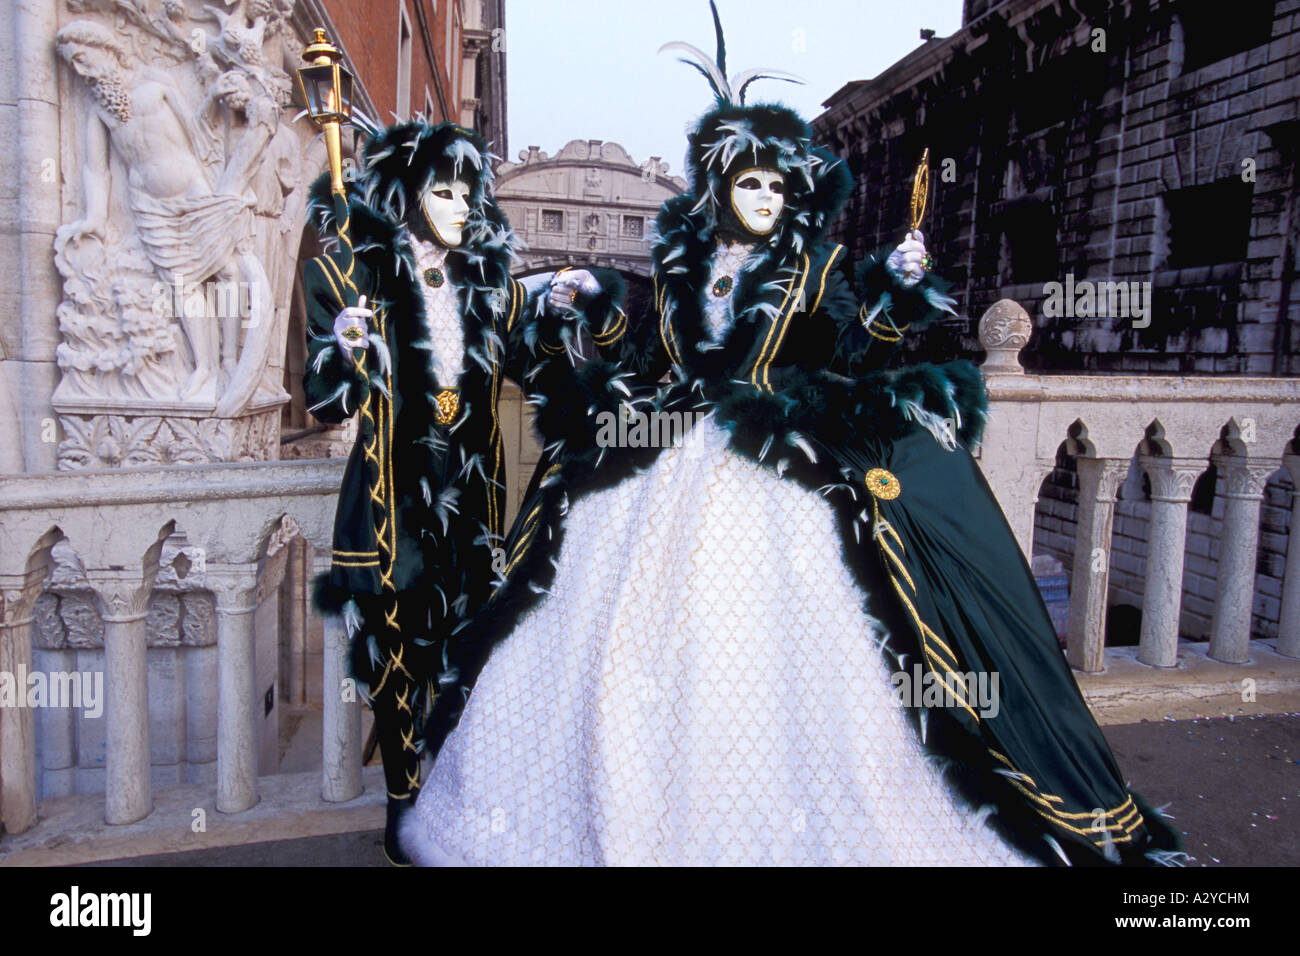 Traditional Velvet and Pearl Costumes for Carnevale near the Bridge of Sighs, Venice Stock Photo